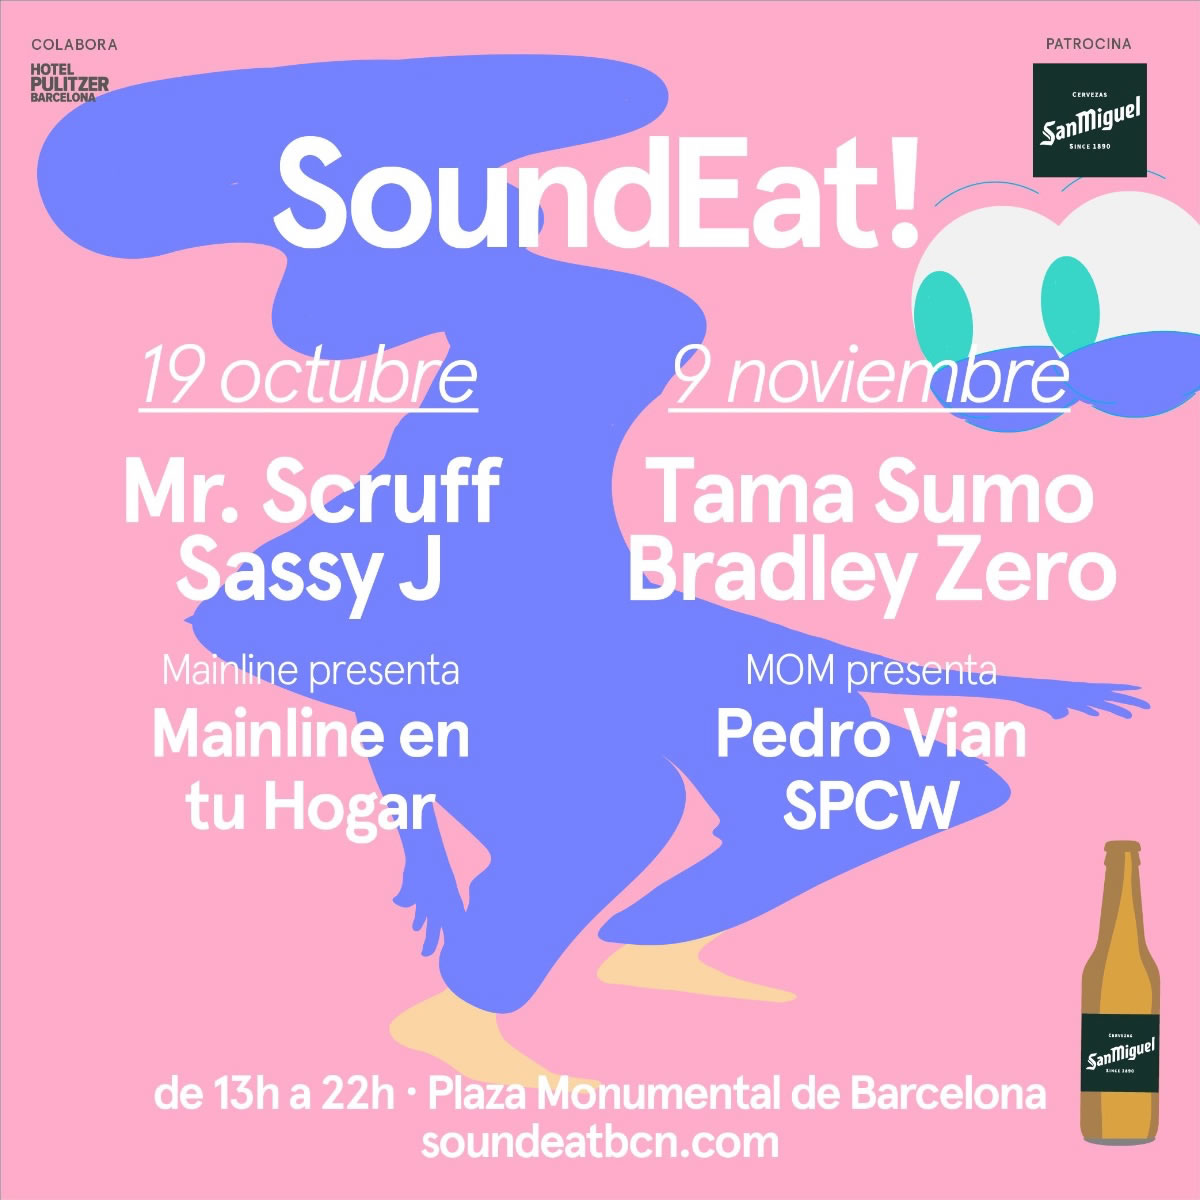 The best DJs and the best food at Soundeat 2019.